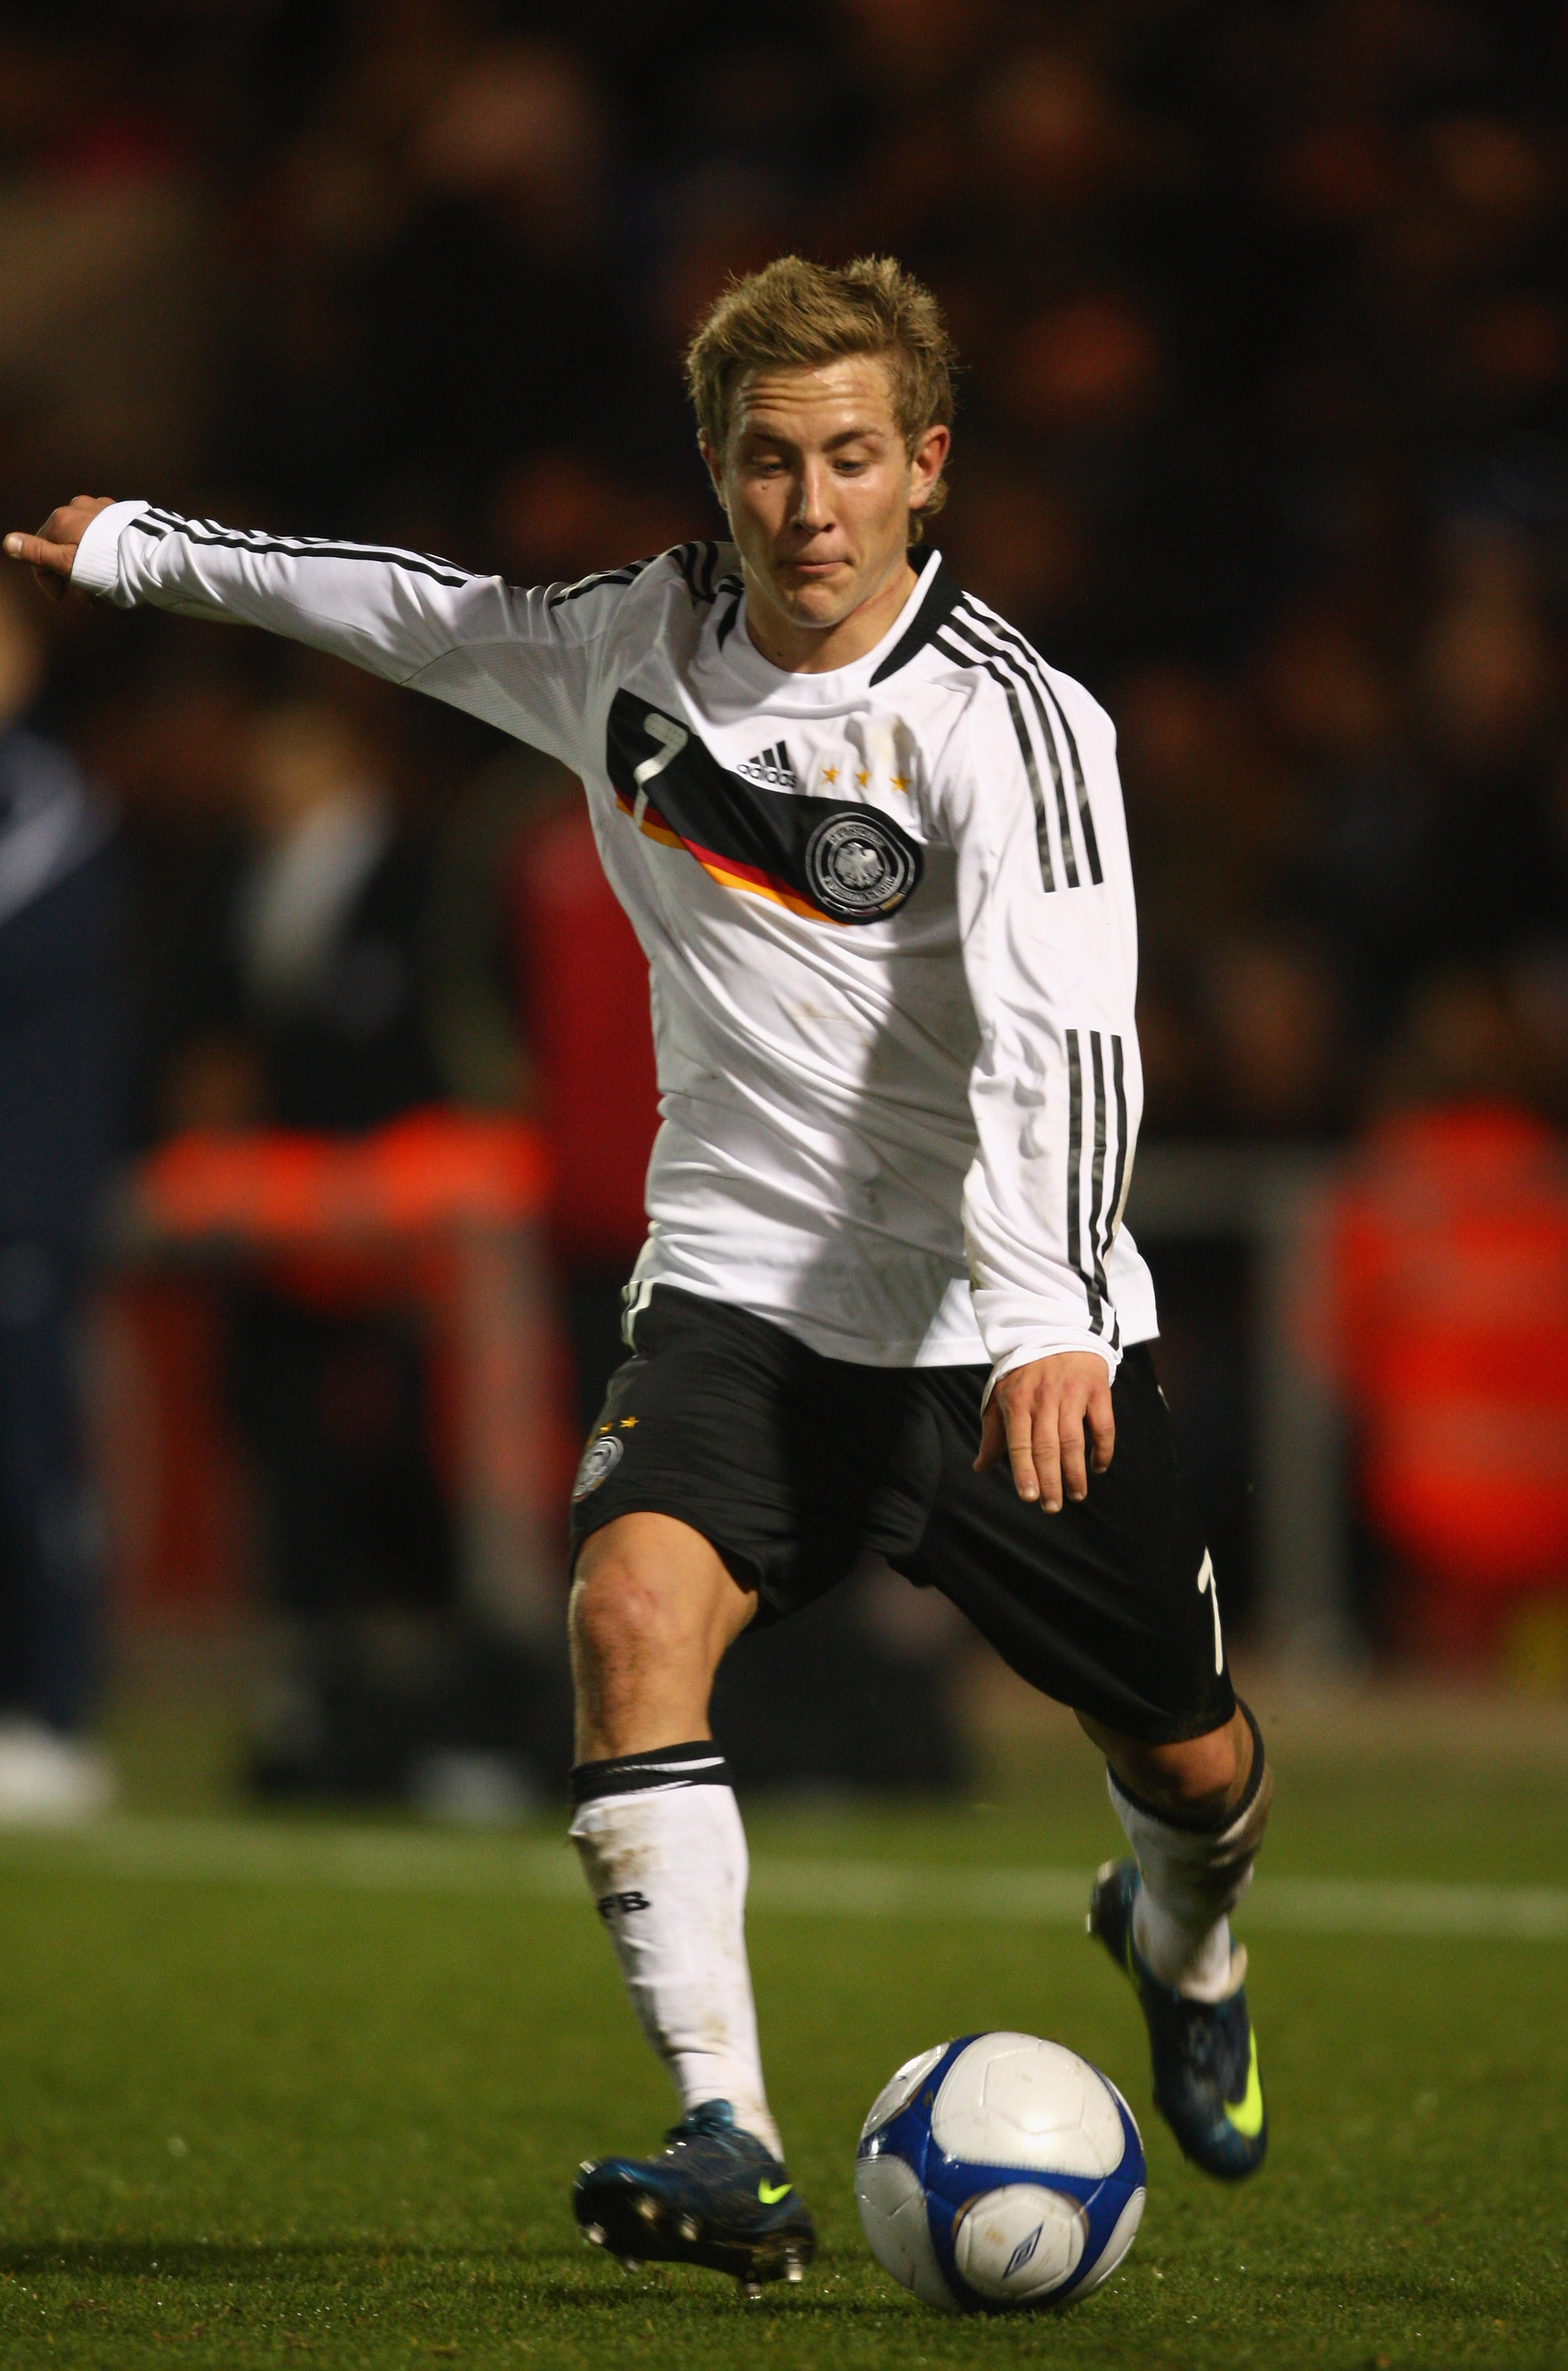 COLCHESTER, UNITED KINGDOM - NOVEMBER 18:  Lewis Holtby of Germany in action of England during the match between England U19 and Germany U19 at the Weston Homes Community Stadium on November 18, 2008 in Colchester, England.  (Photo by Jamie McDonald/Getty